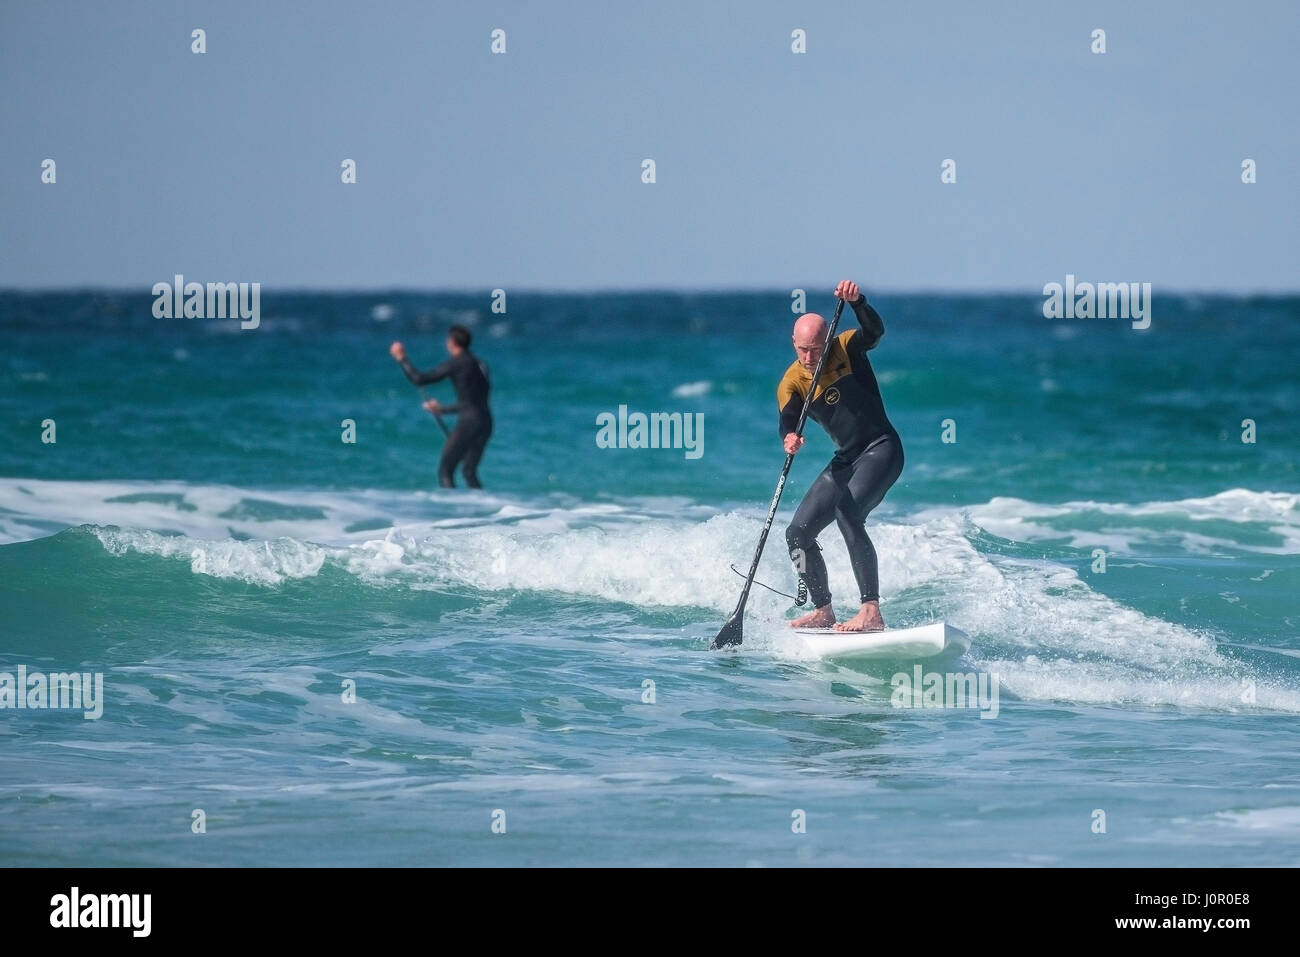 UK Paddle boarding Paddle boarder Surf Wave Sea Spray Watersport Physical activity Skill Spectacular action Leisure activity Lifestyle Stock Photo